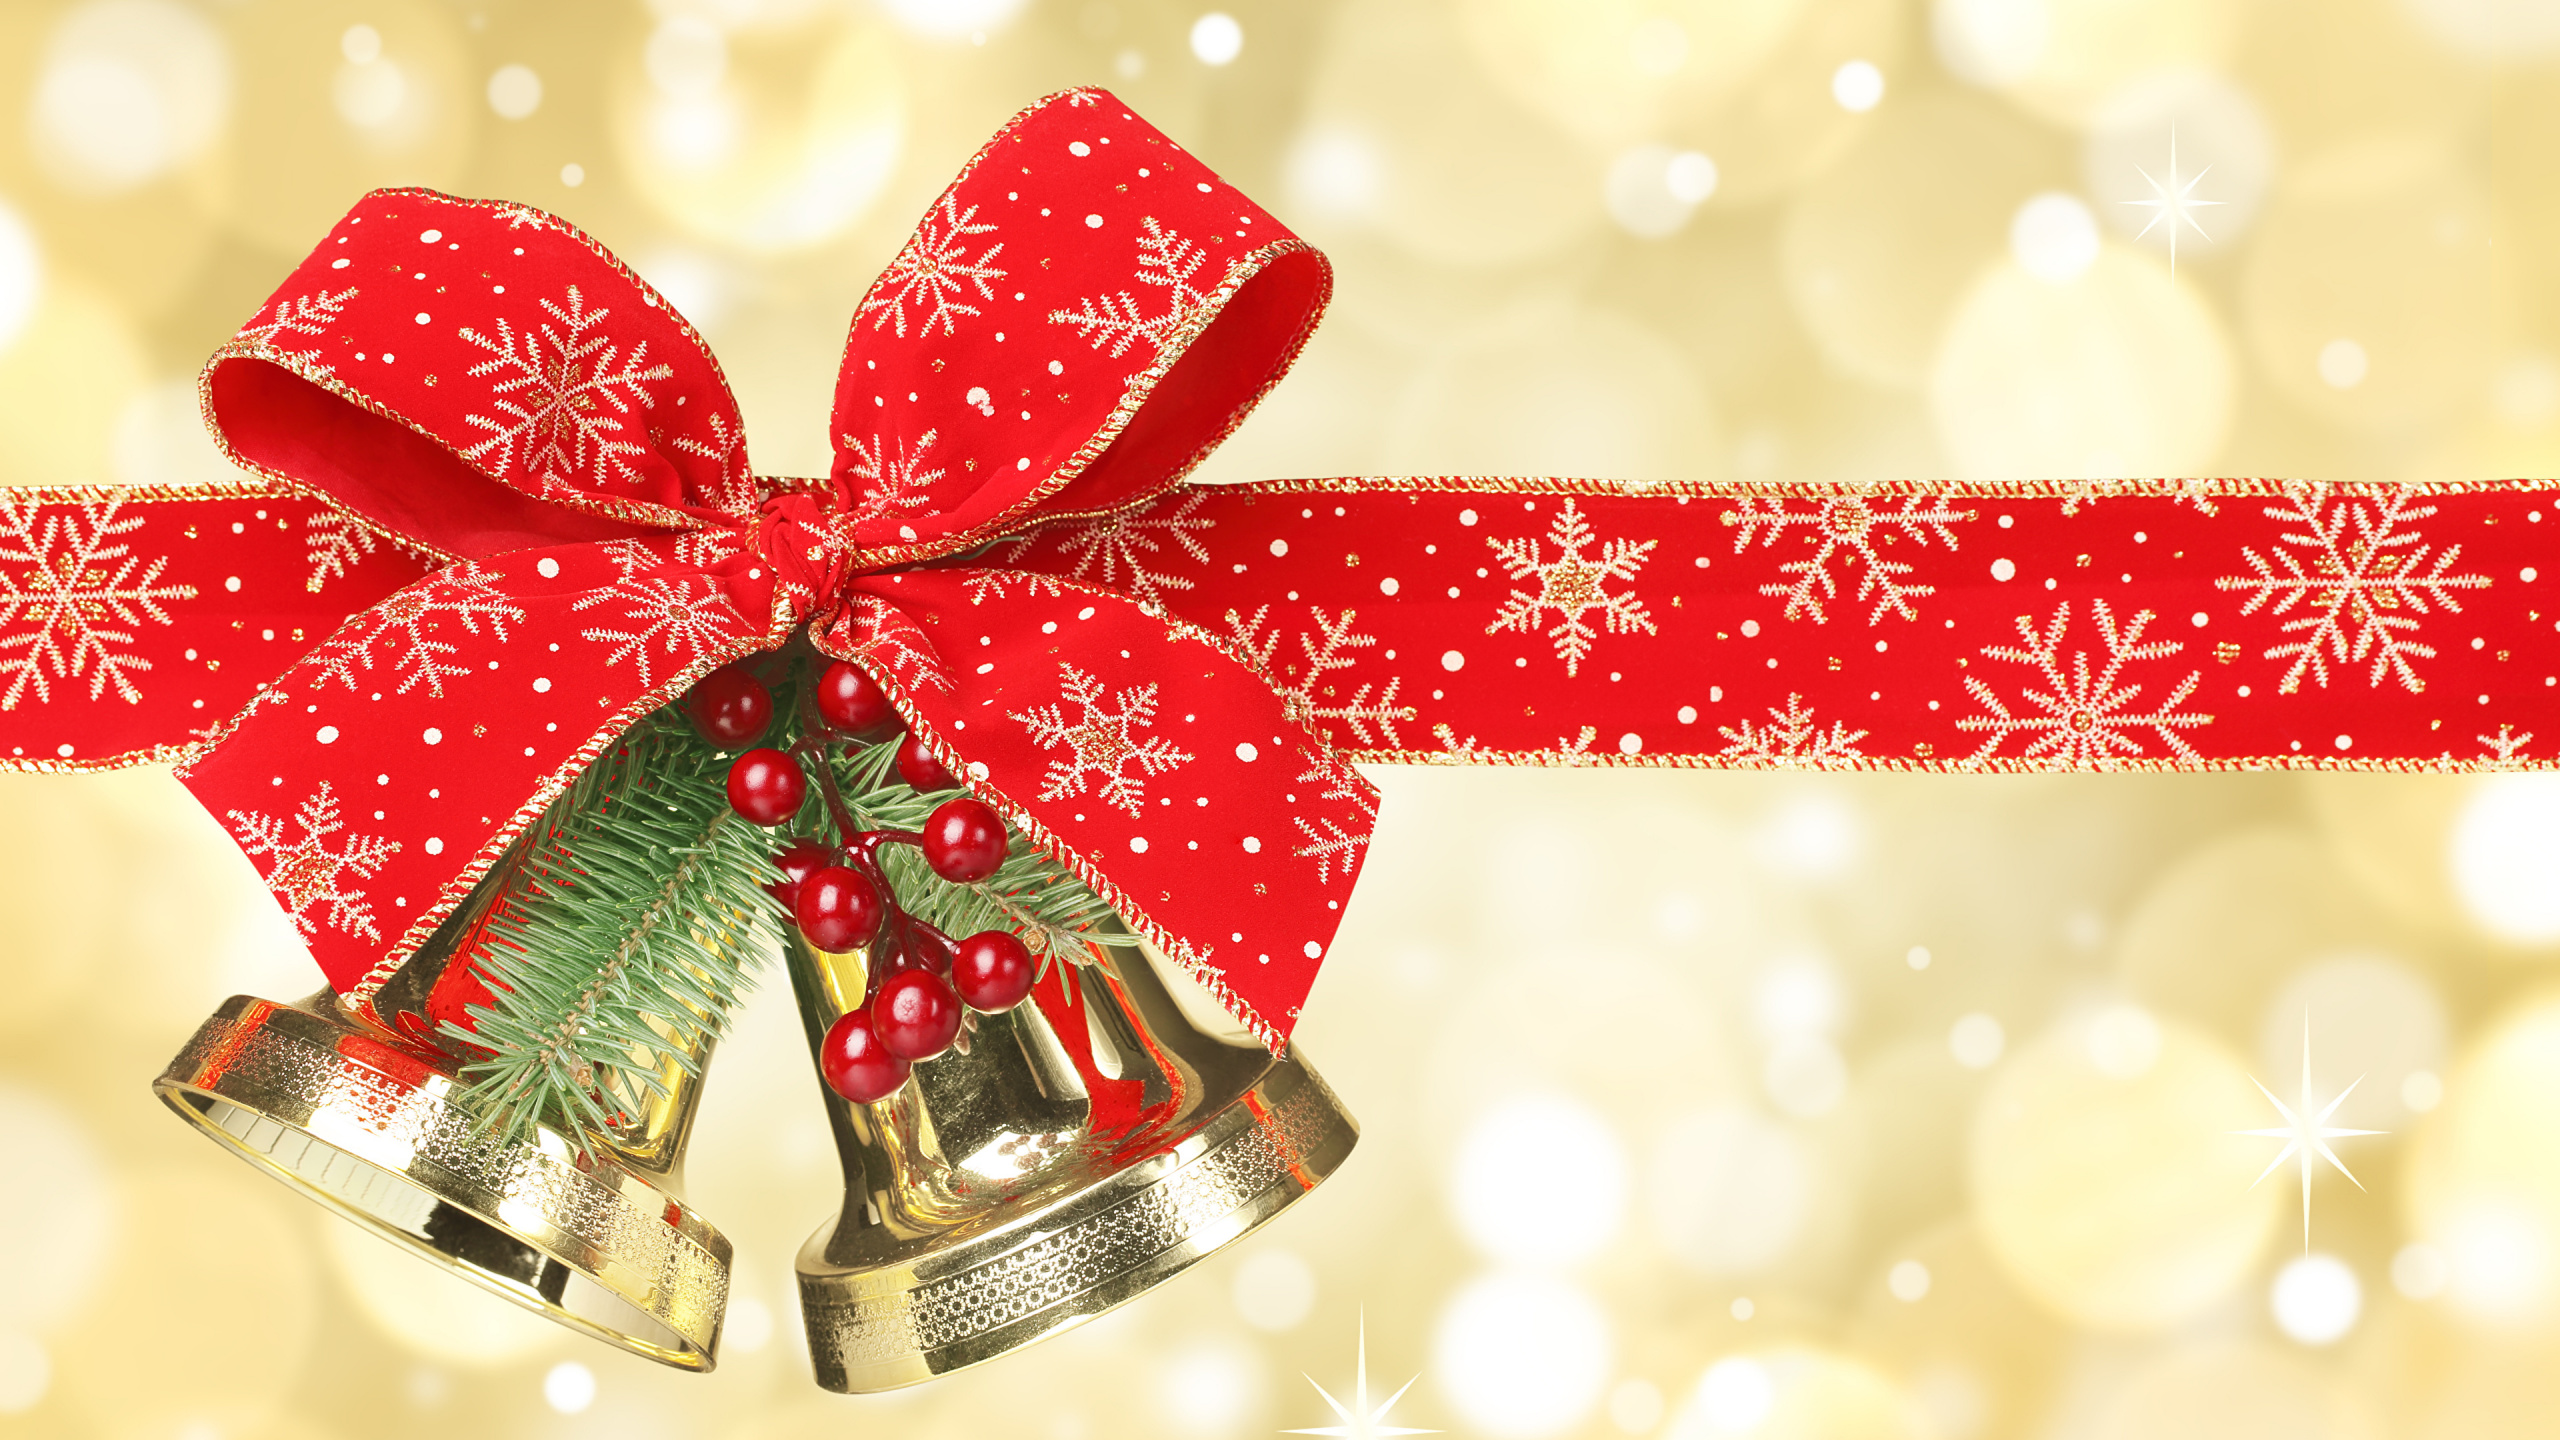 Christmas Day, New Year, Holiday, Christmas Ornament, Christmas Decoration. Wallpaper in 2560x1440 Resolution